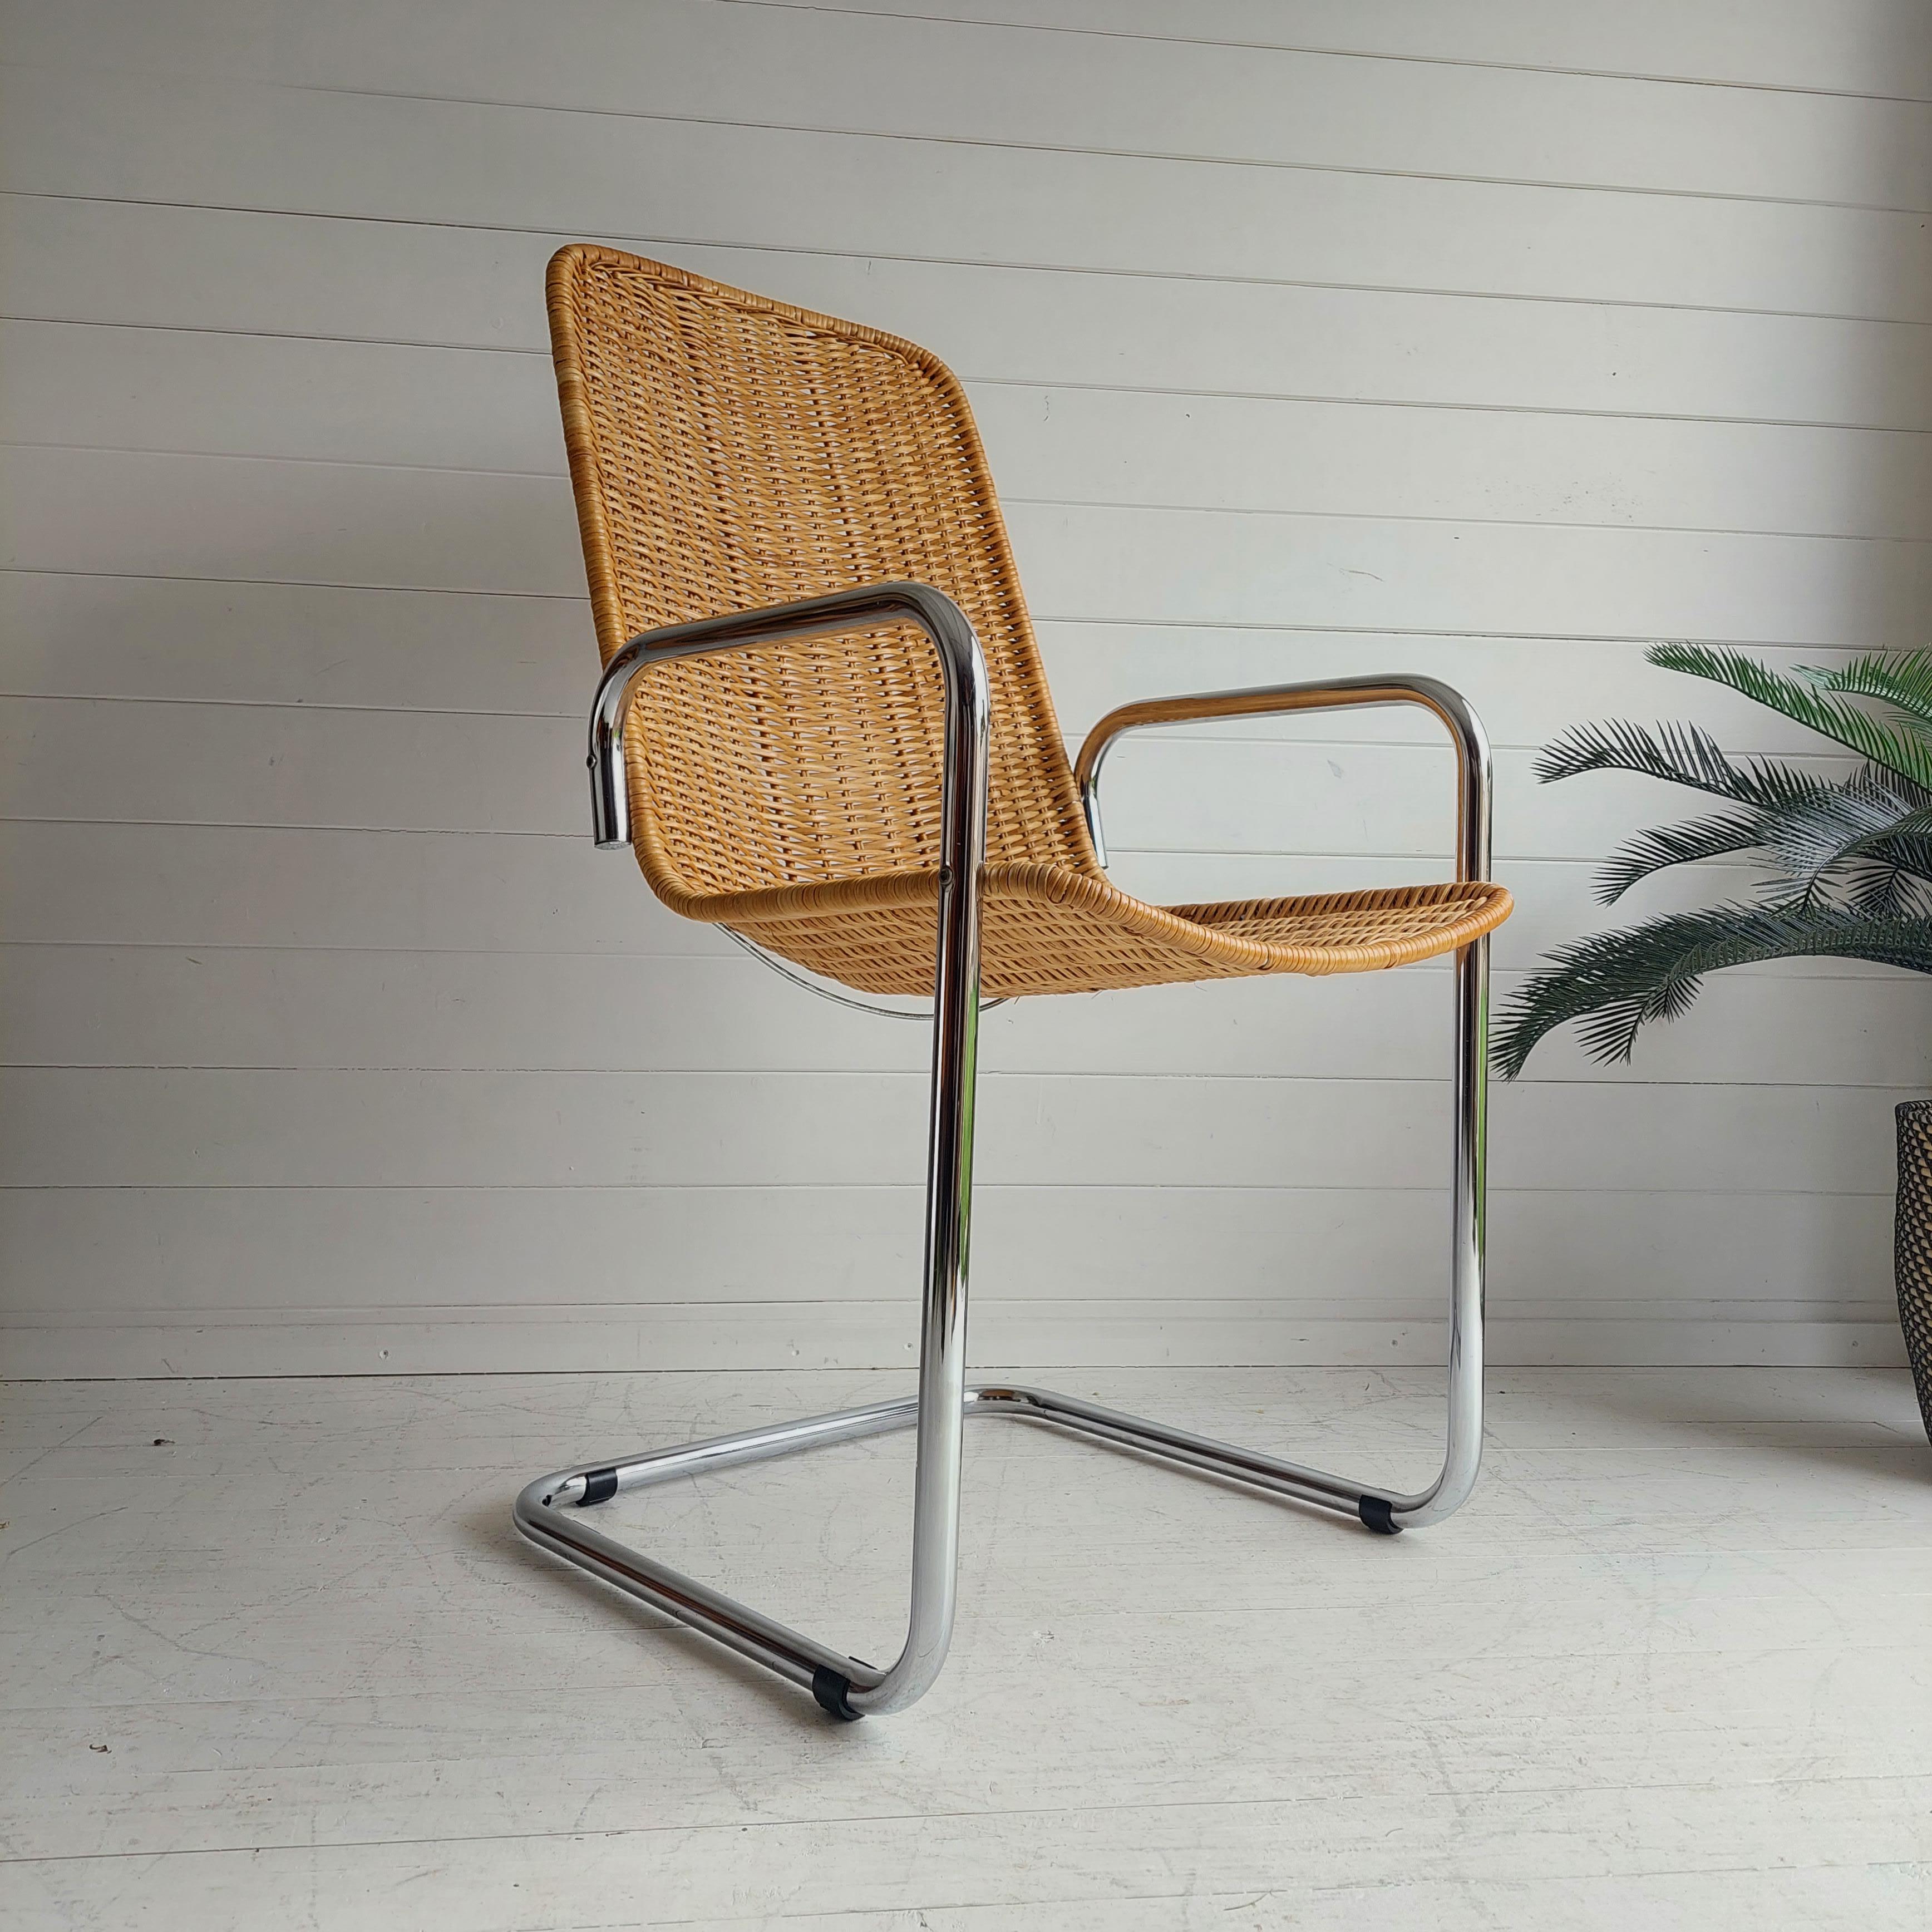 European Mid Century Chrome and Rattan Chair Cantilever Breuer MR20 Style Wicker, 1970s